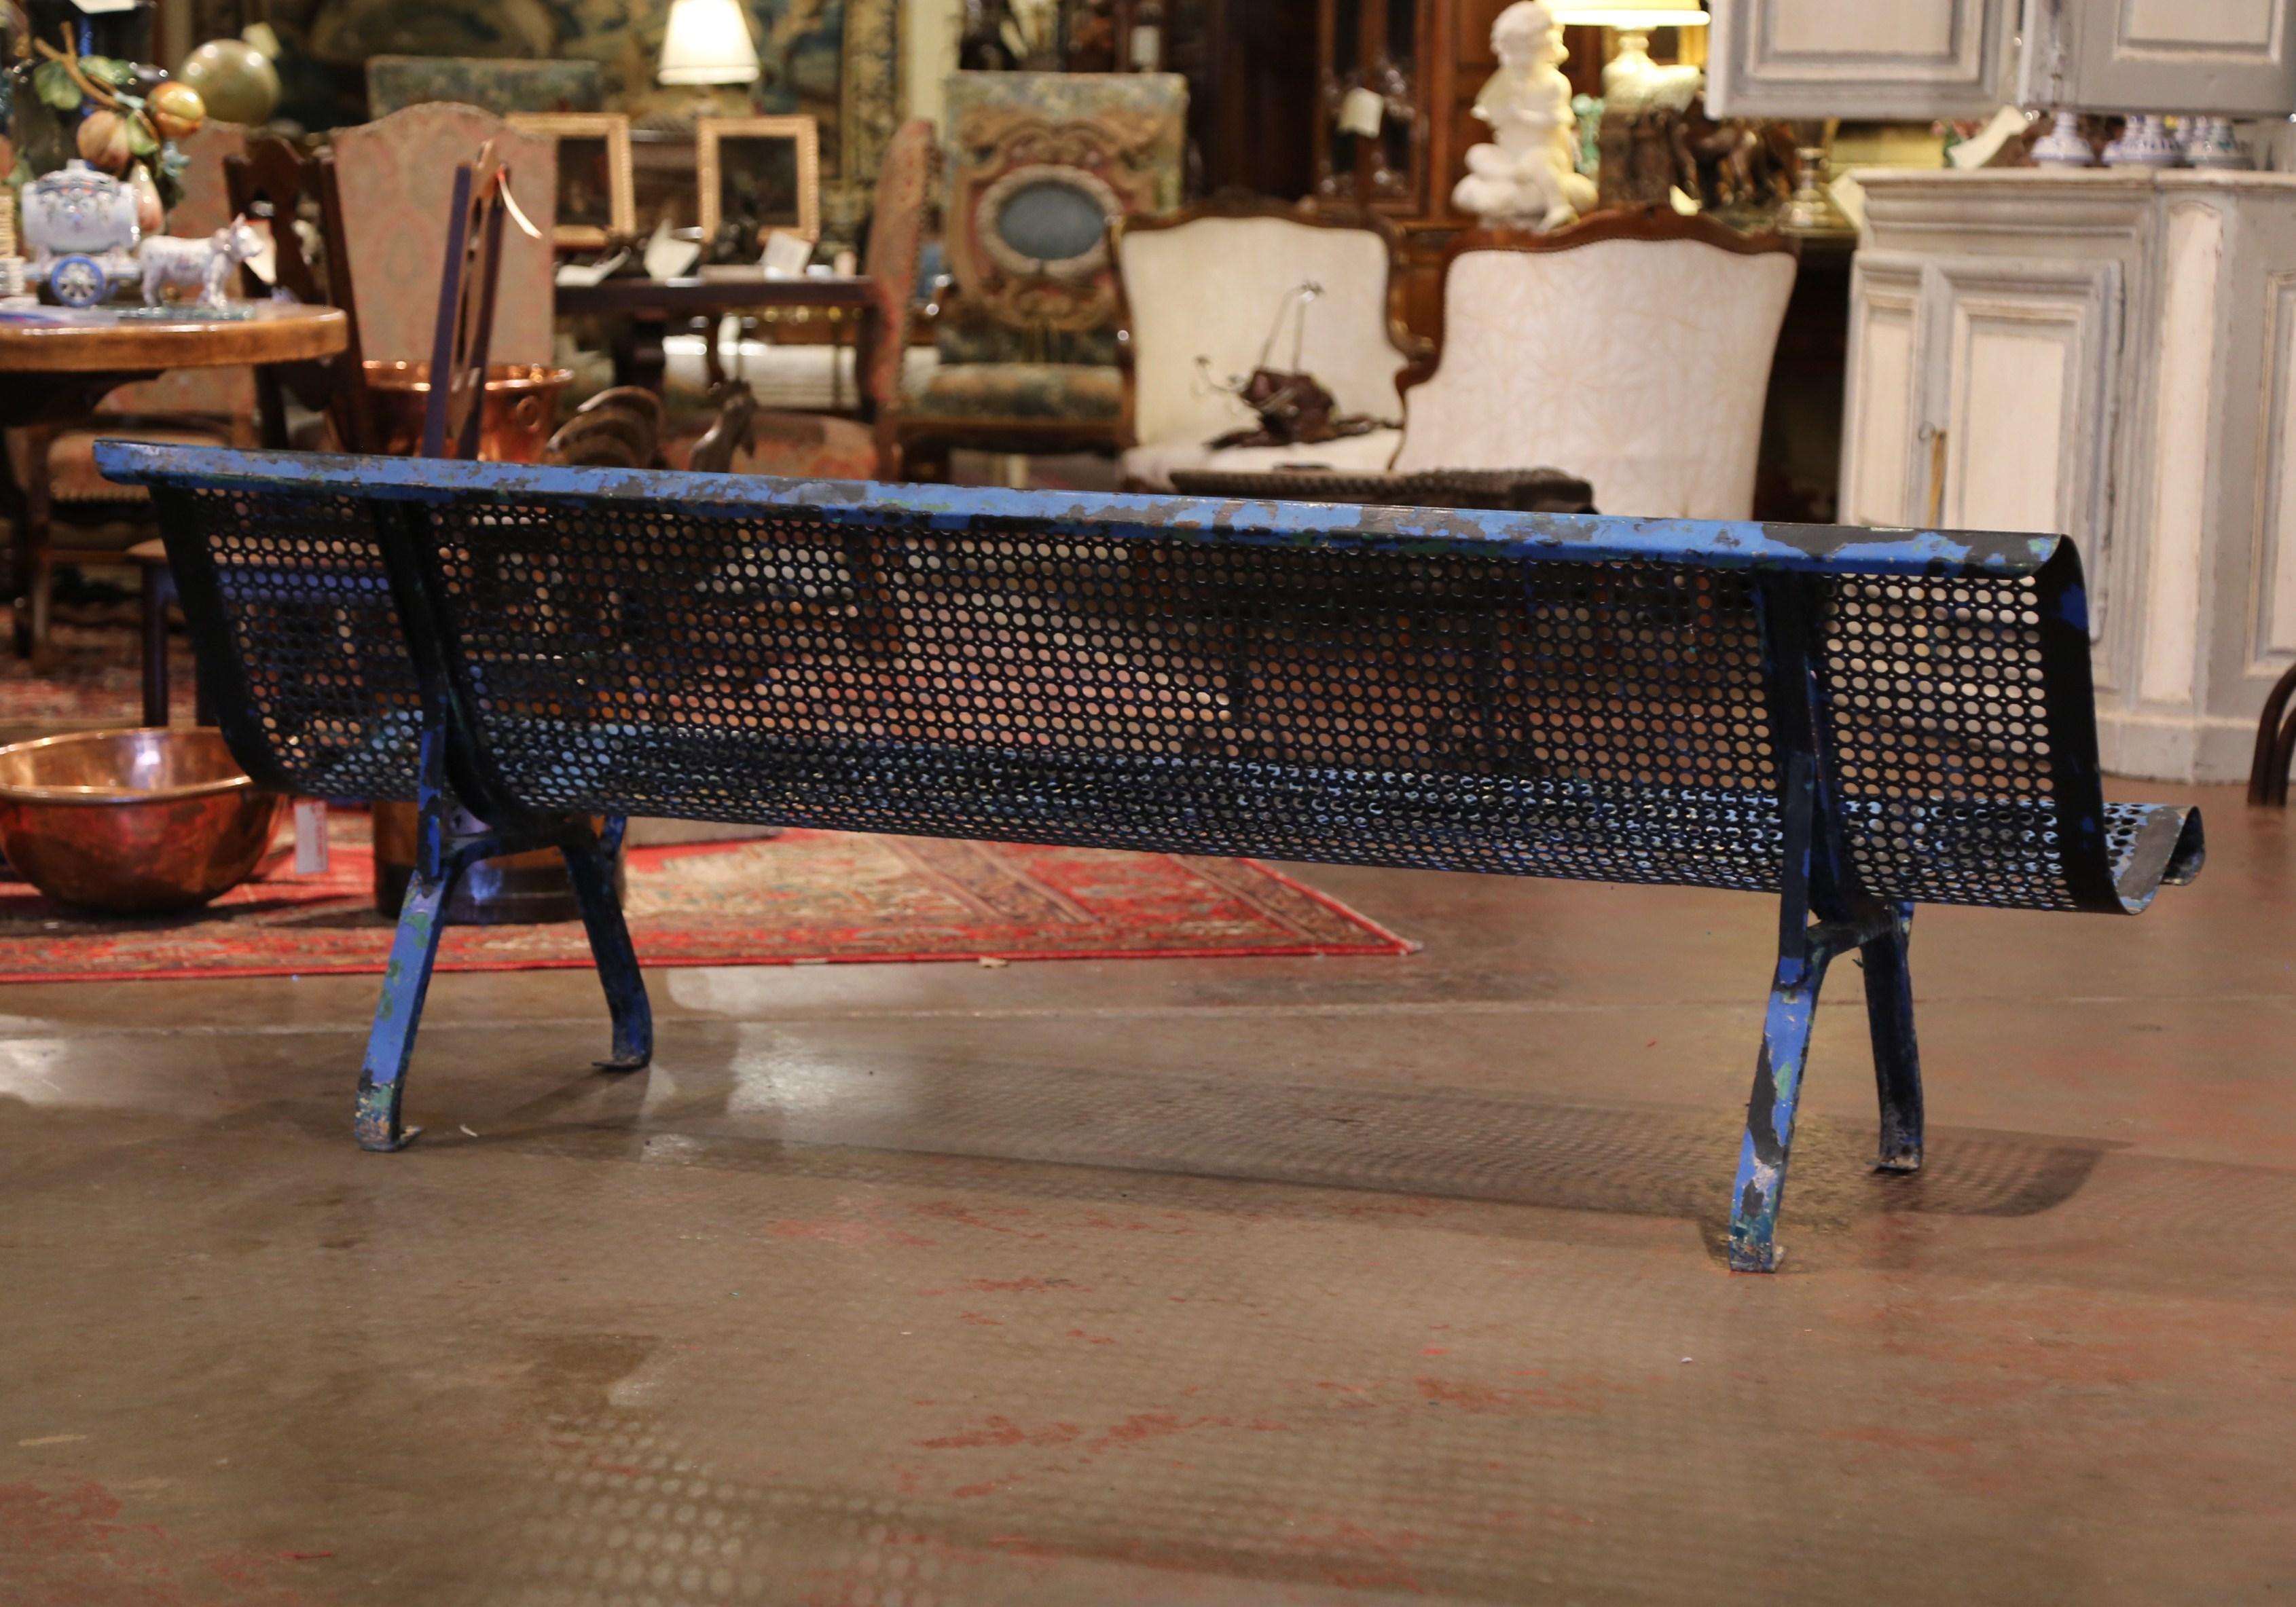 Hand-Crafted Early 20th Century French Iron and Metal Garden Bench with Curved Back and Seat